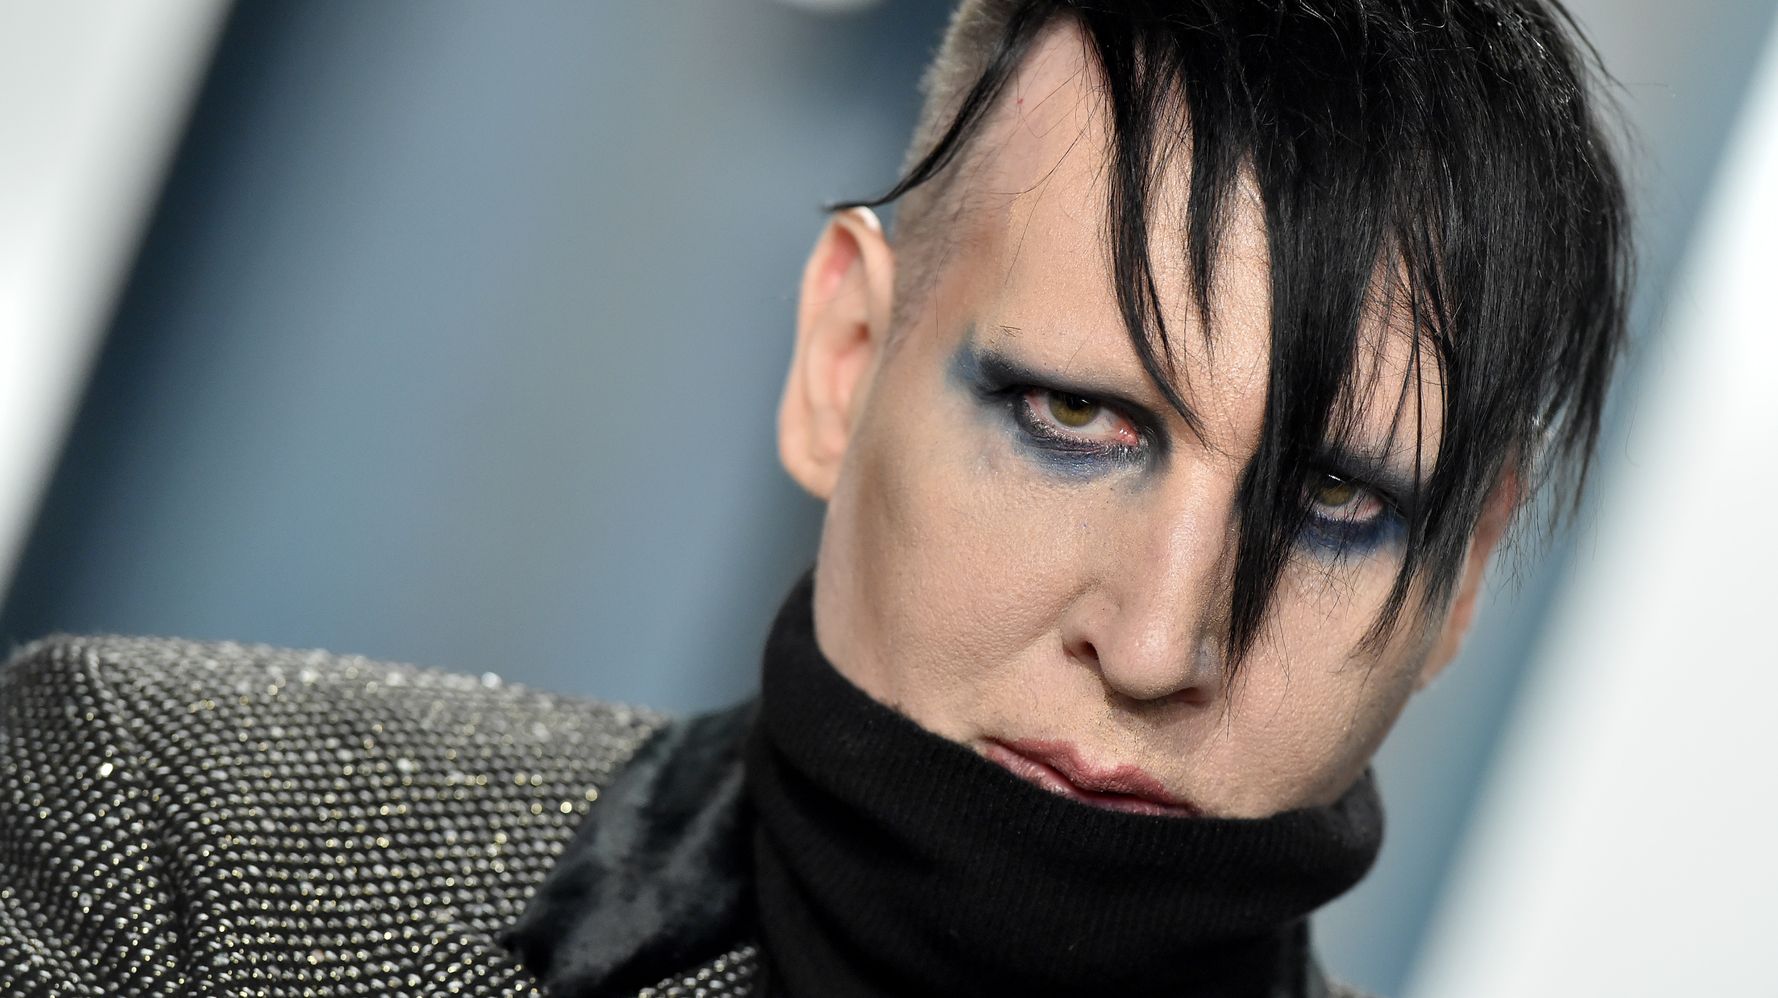 LA sheriff investigating allegations of domestic violence against Marilyn Manson